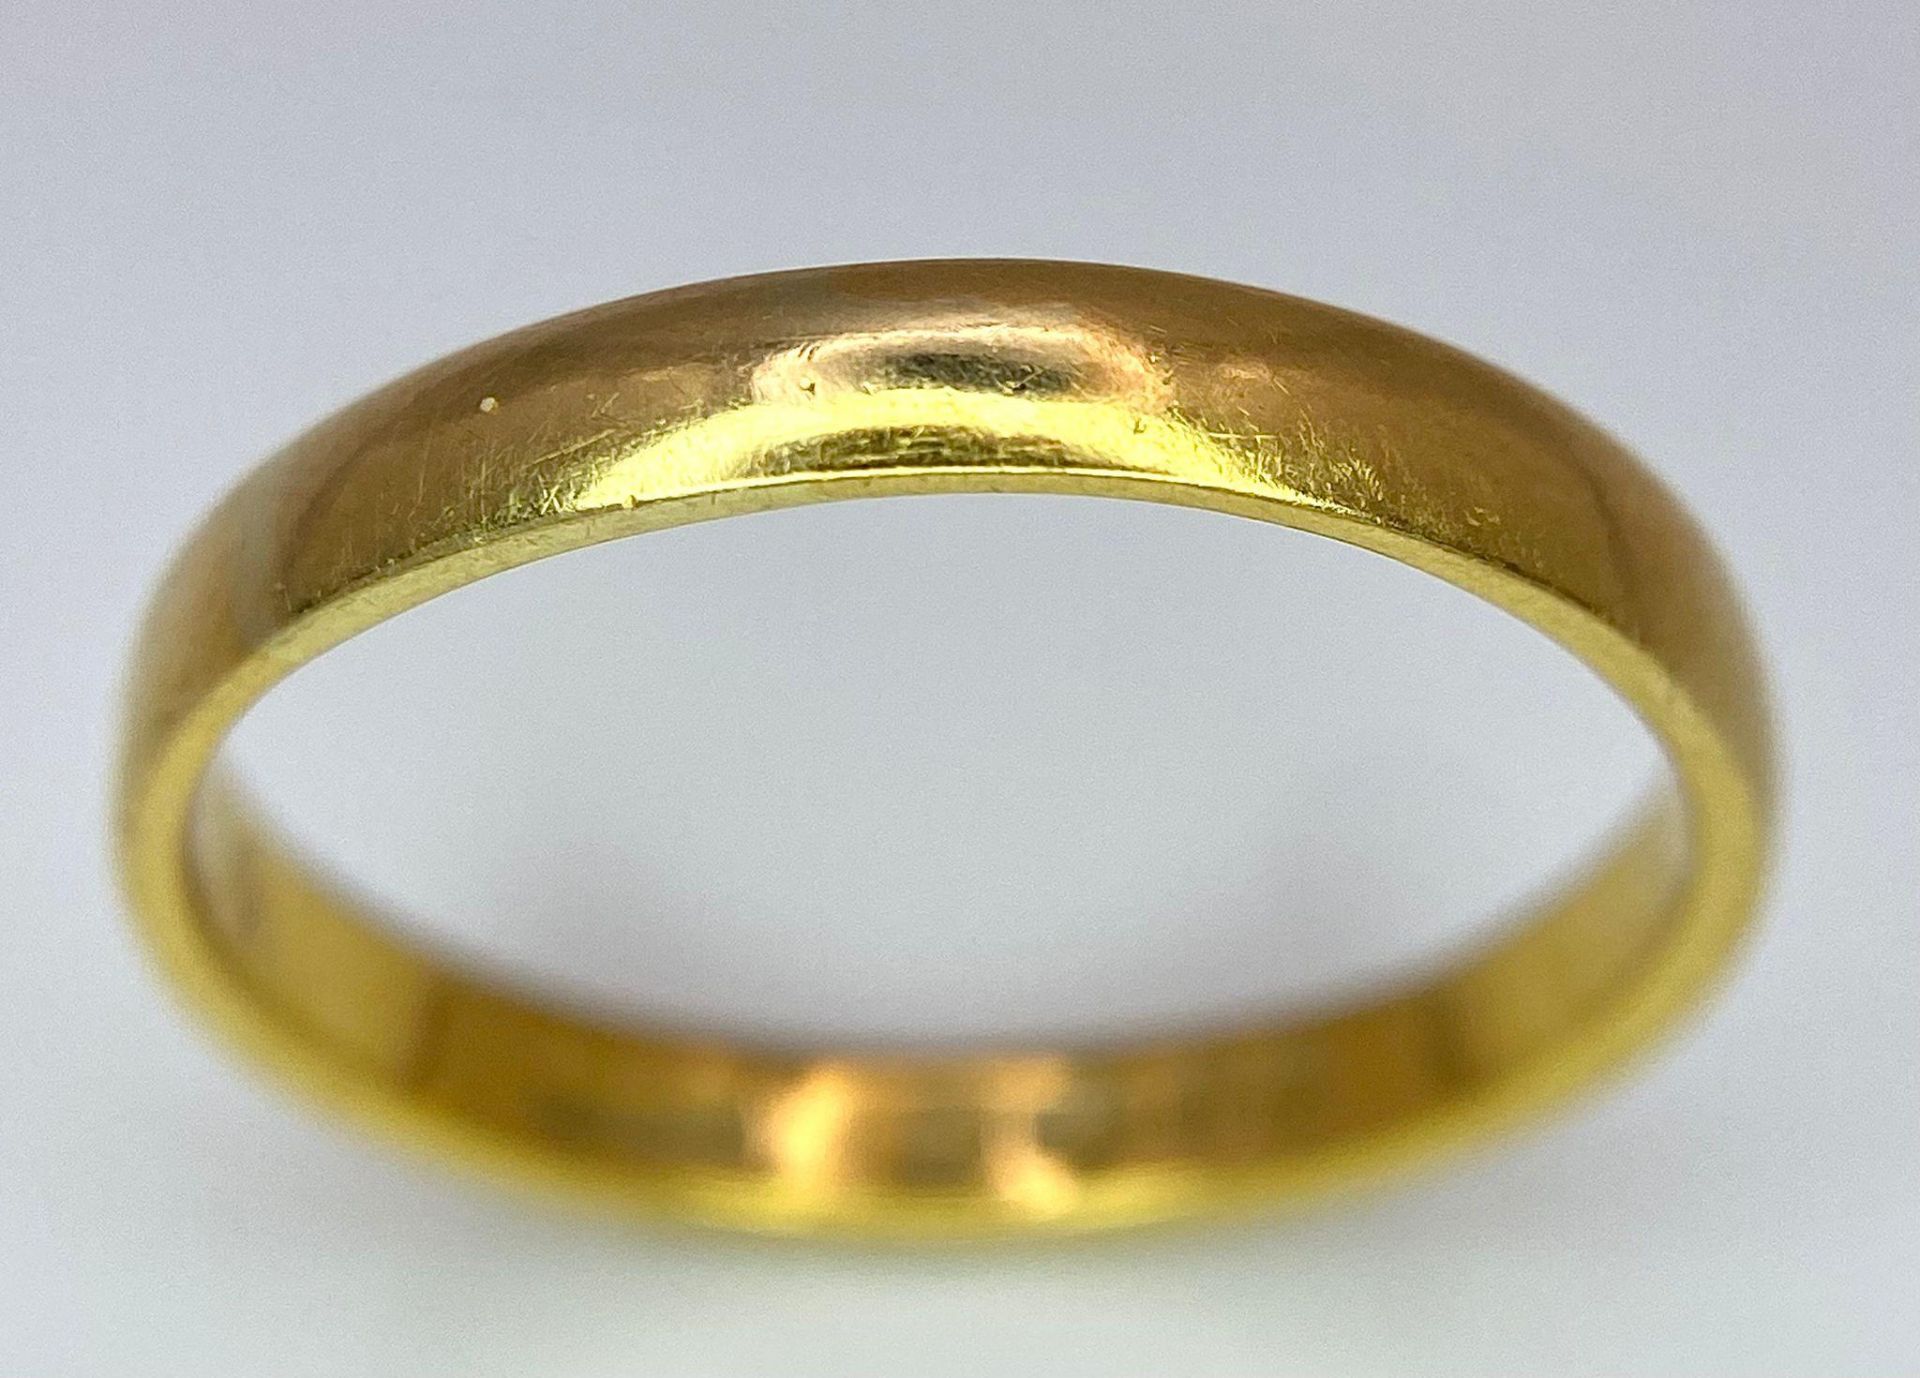 A 22 K yellow gold wedding band ring, fully hallmarked, size: Q, weight: 3.3 g.